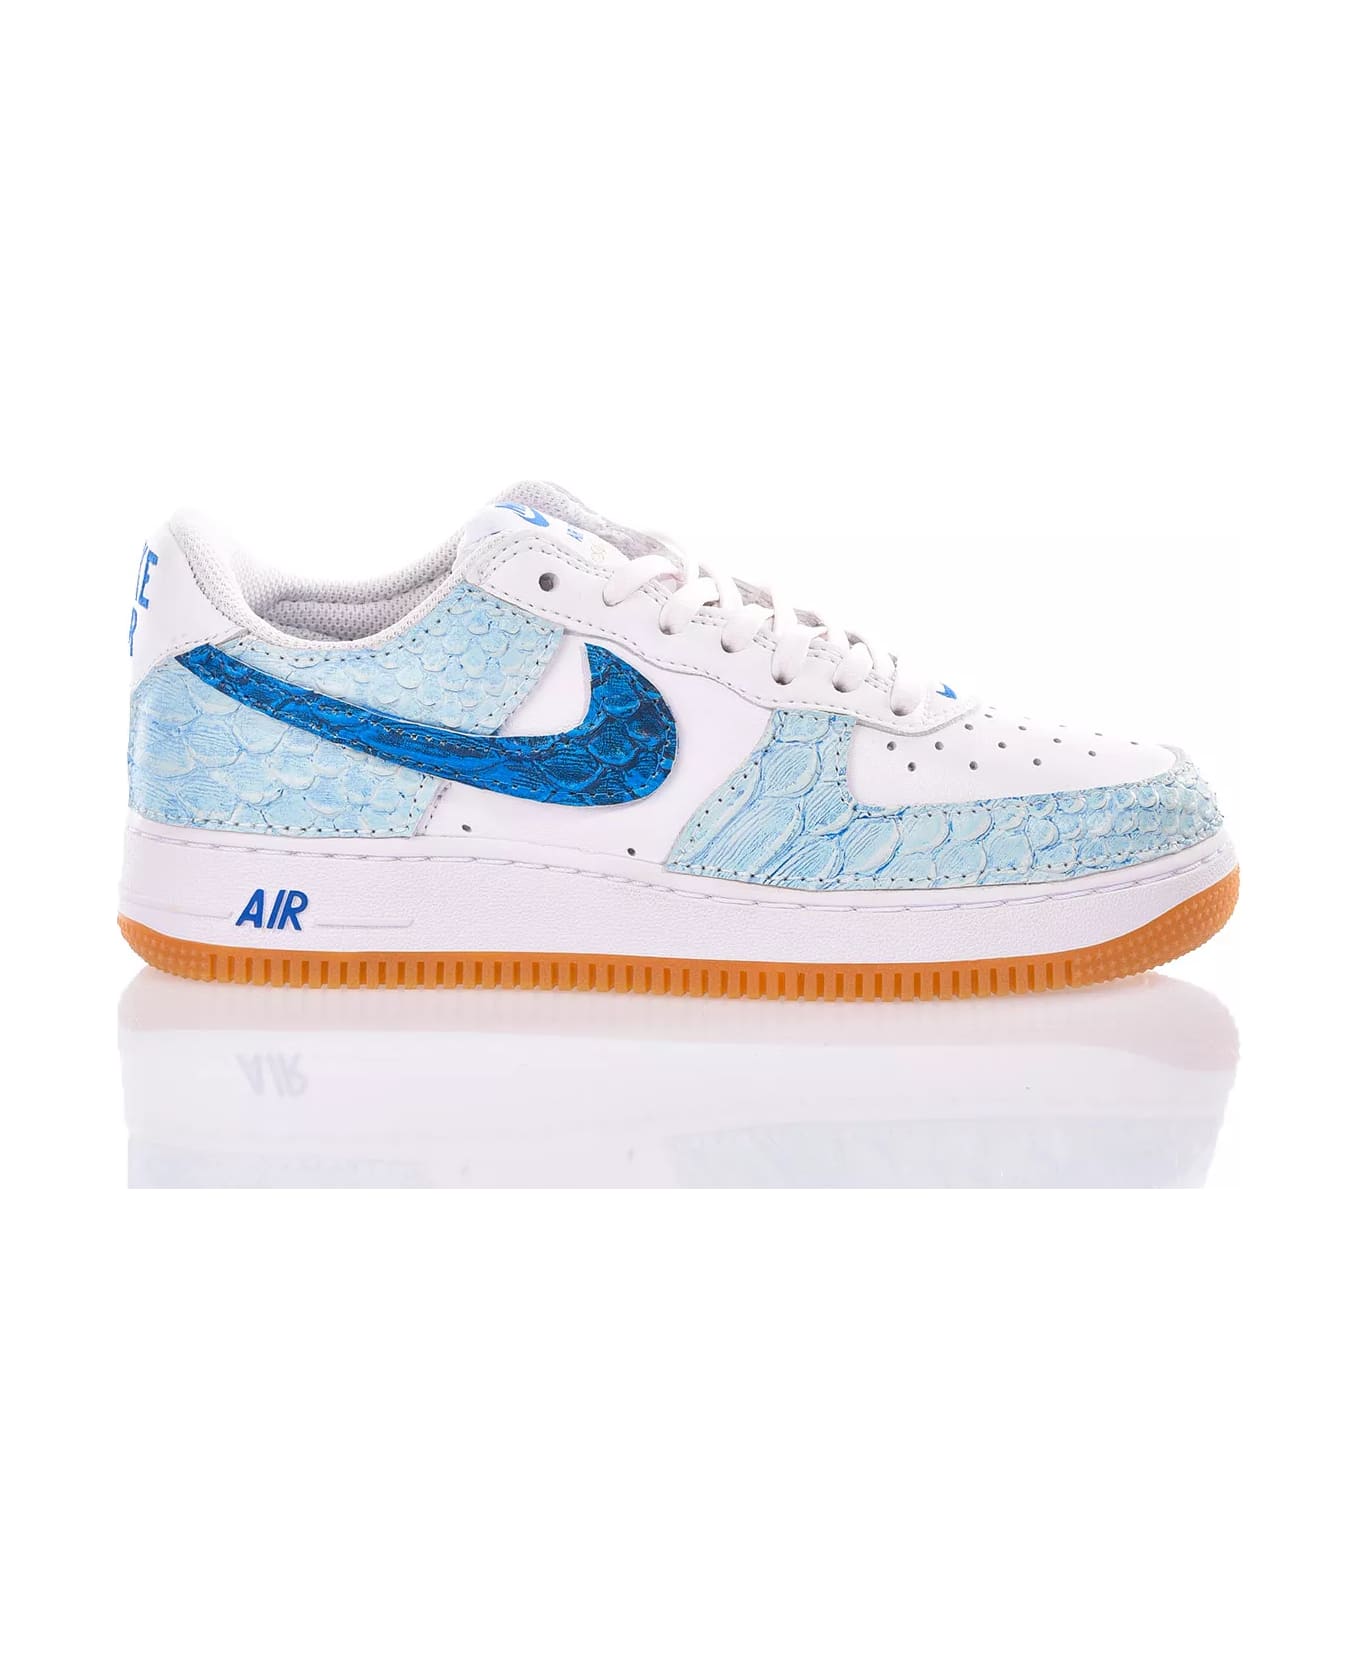 Mimanera Nike Air Force 1 Celestial With Blue Swoosh